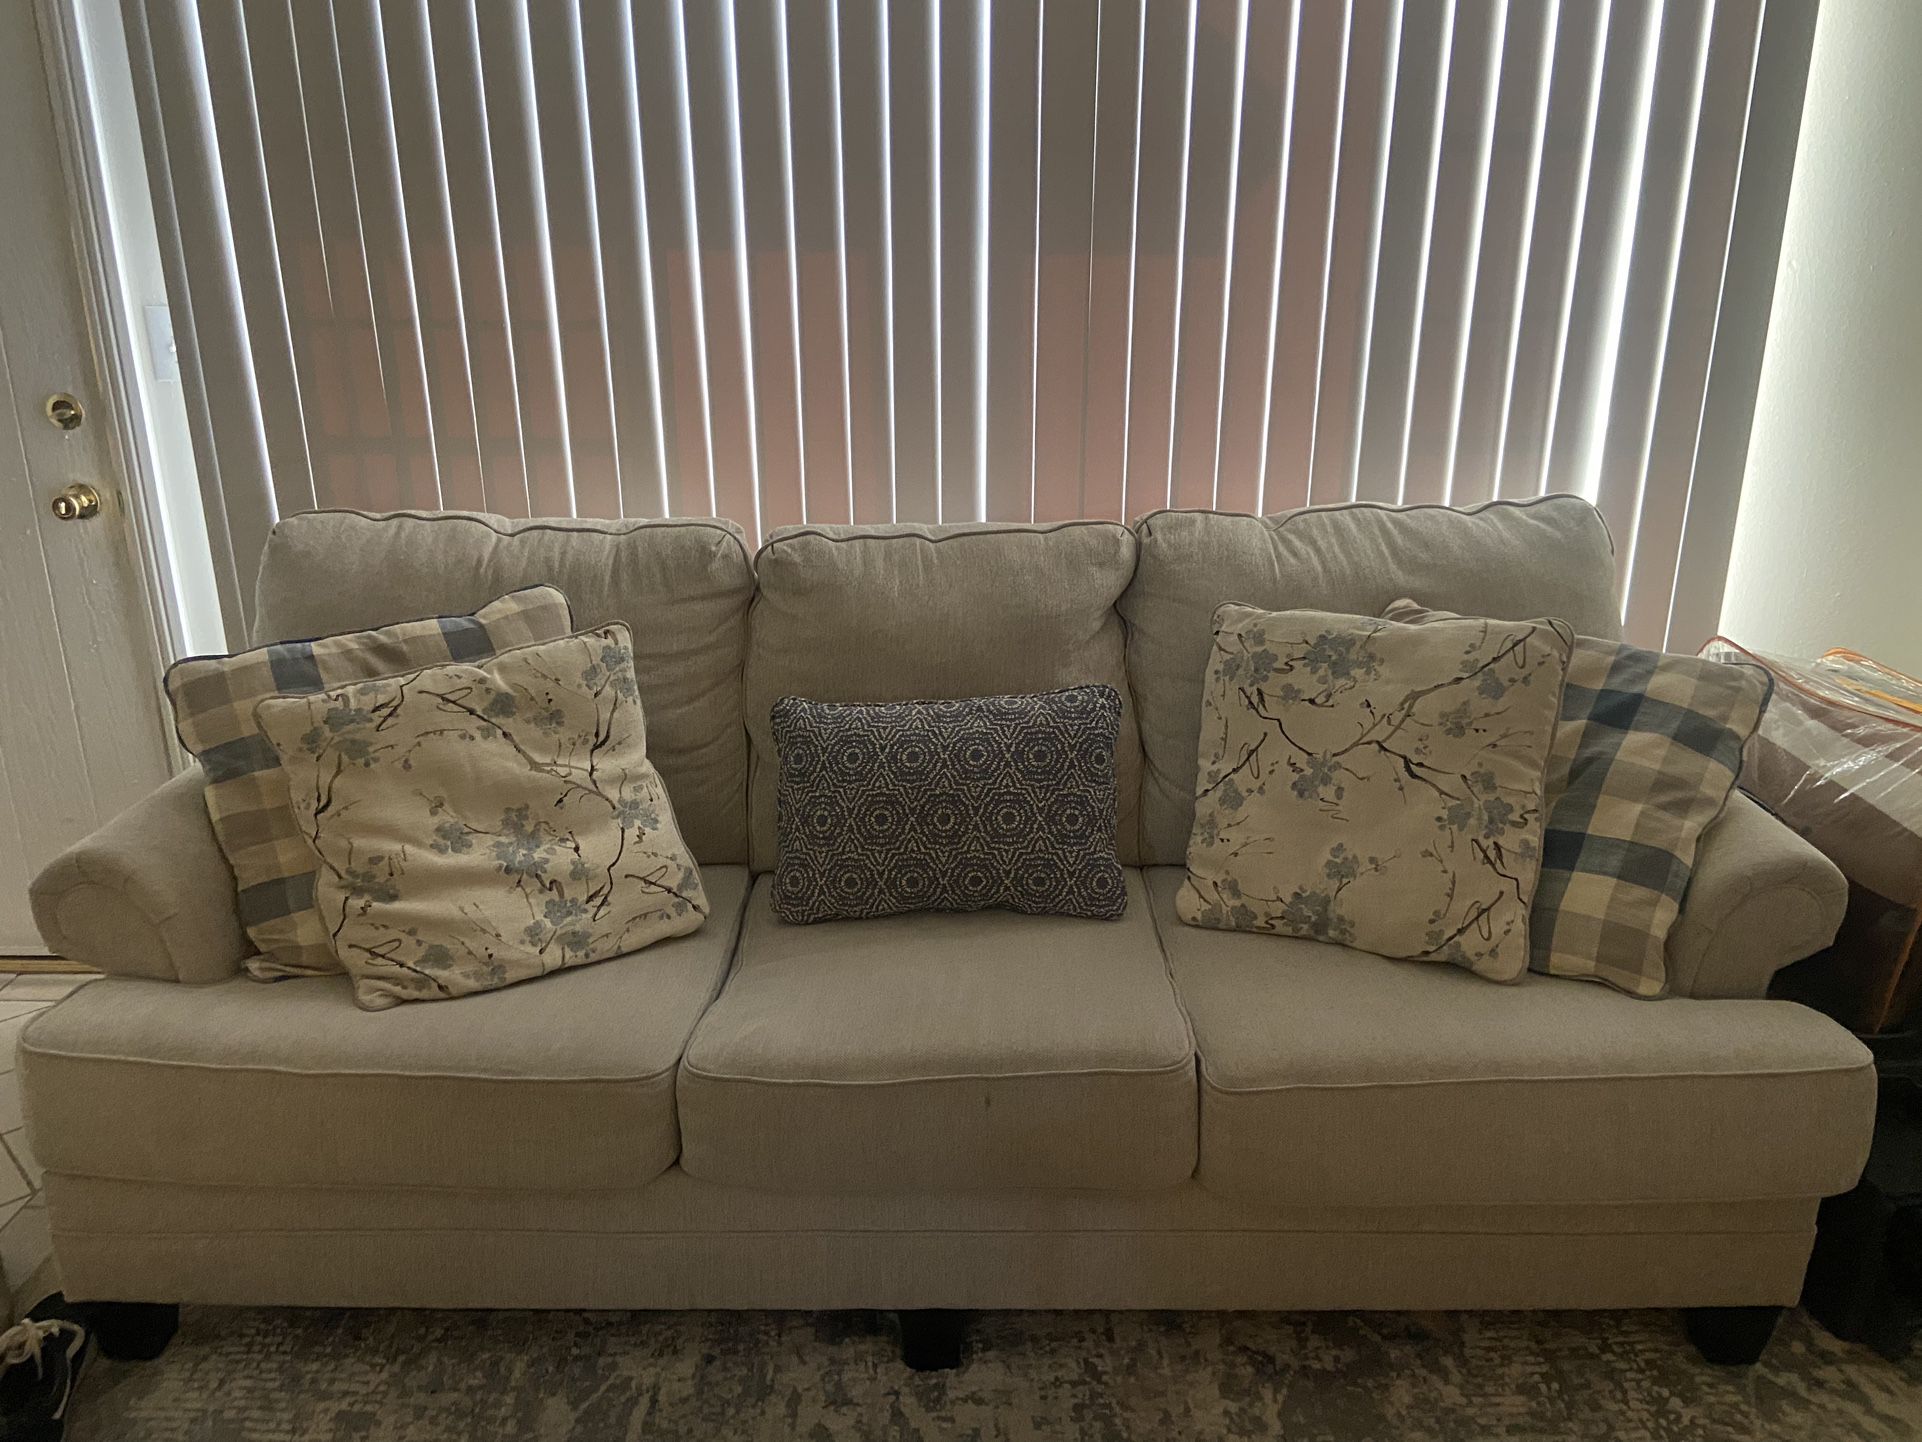 Beige Couch With Pillows 